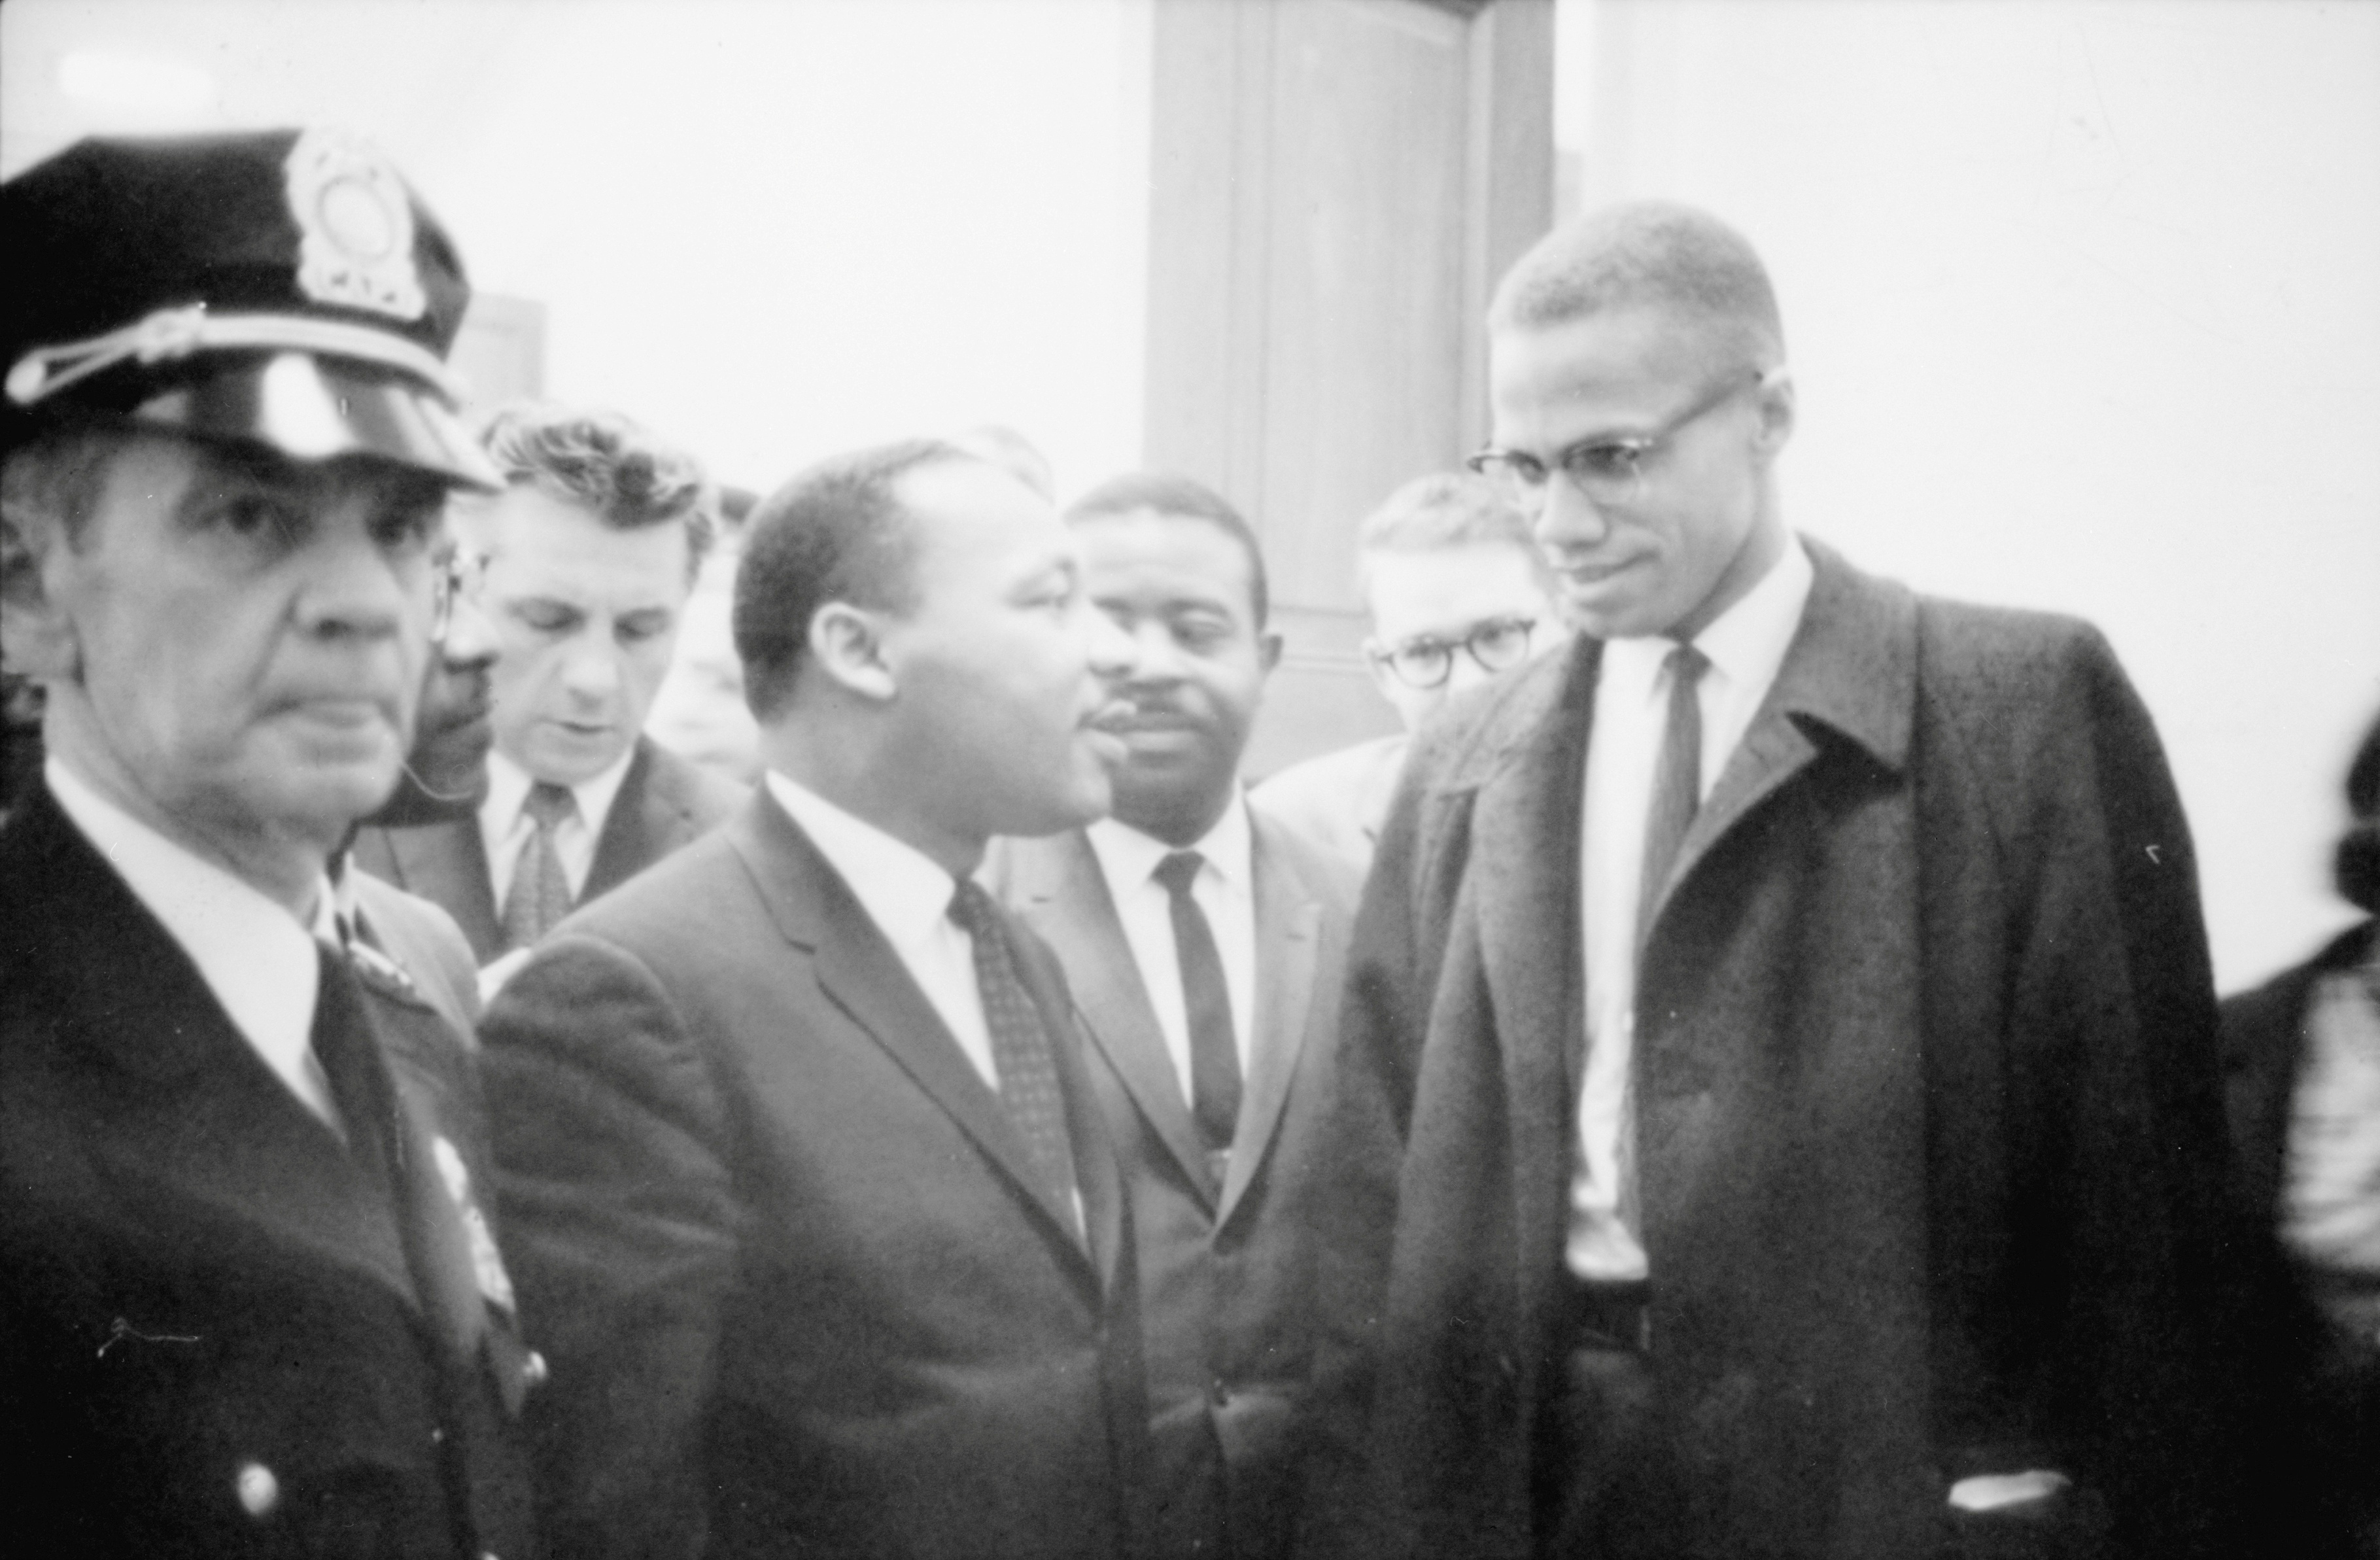 Martin Luther King Jr. and Malcolm X wait for a press conference to begin in an unknown location